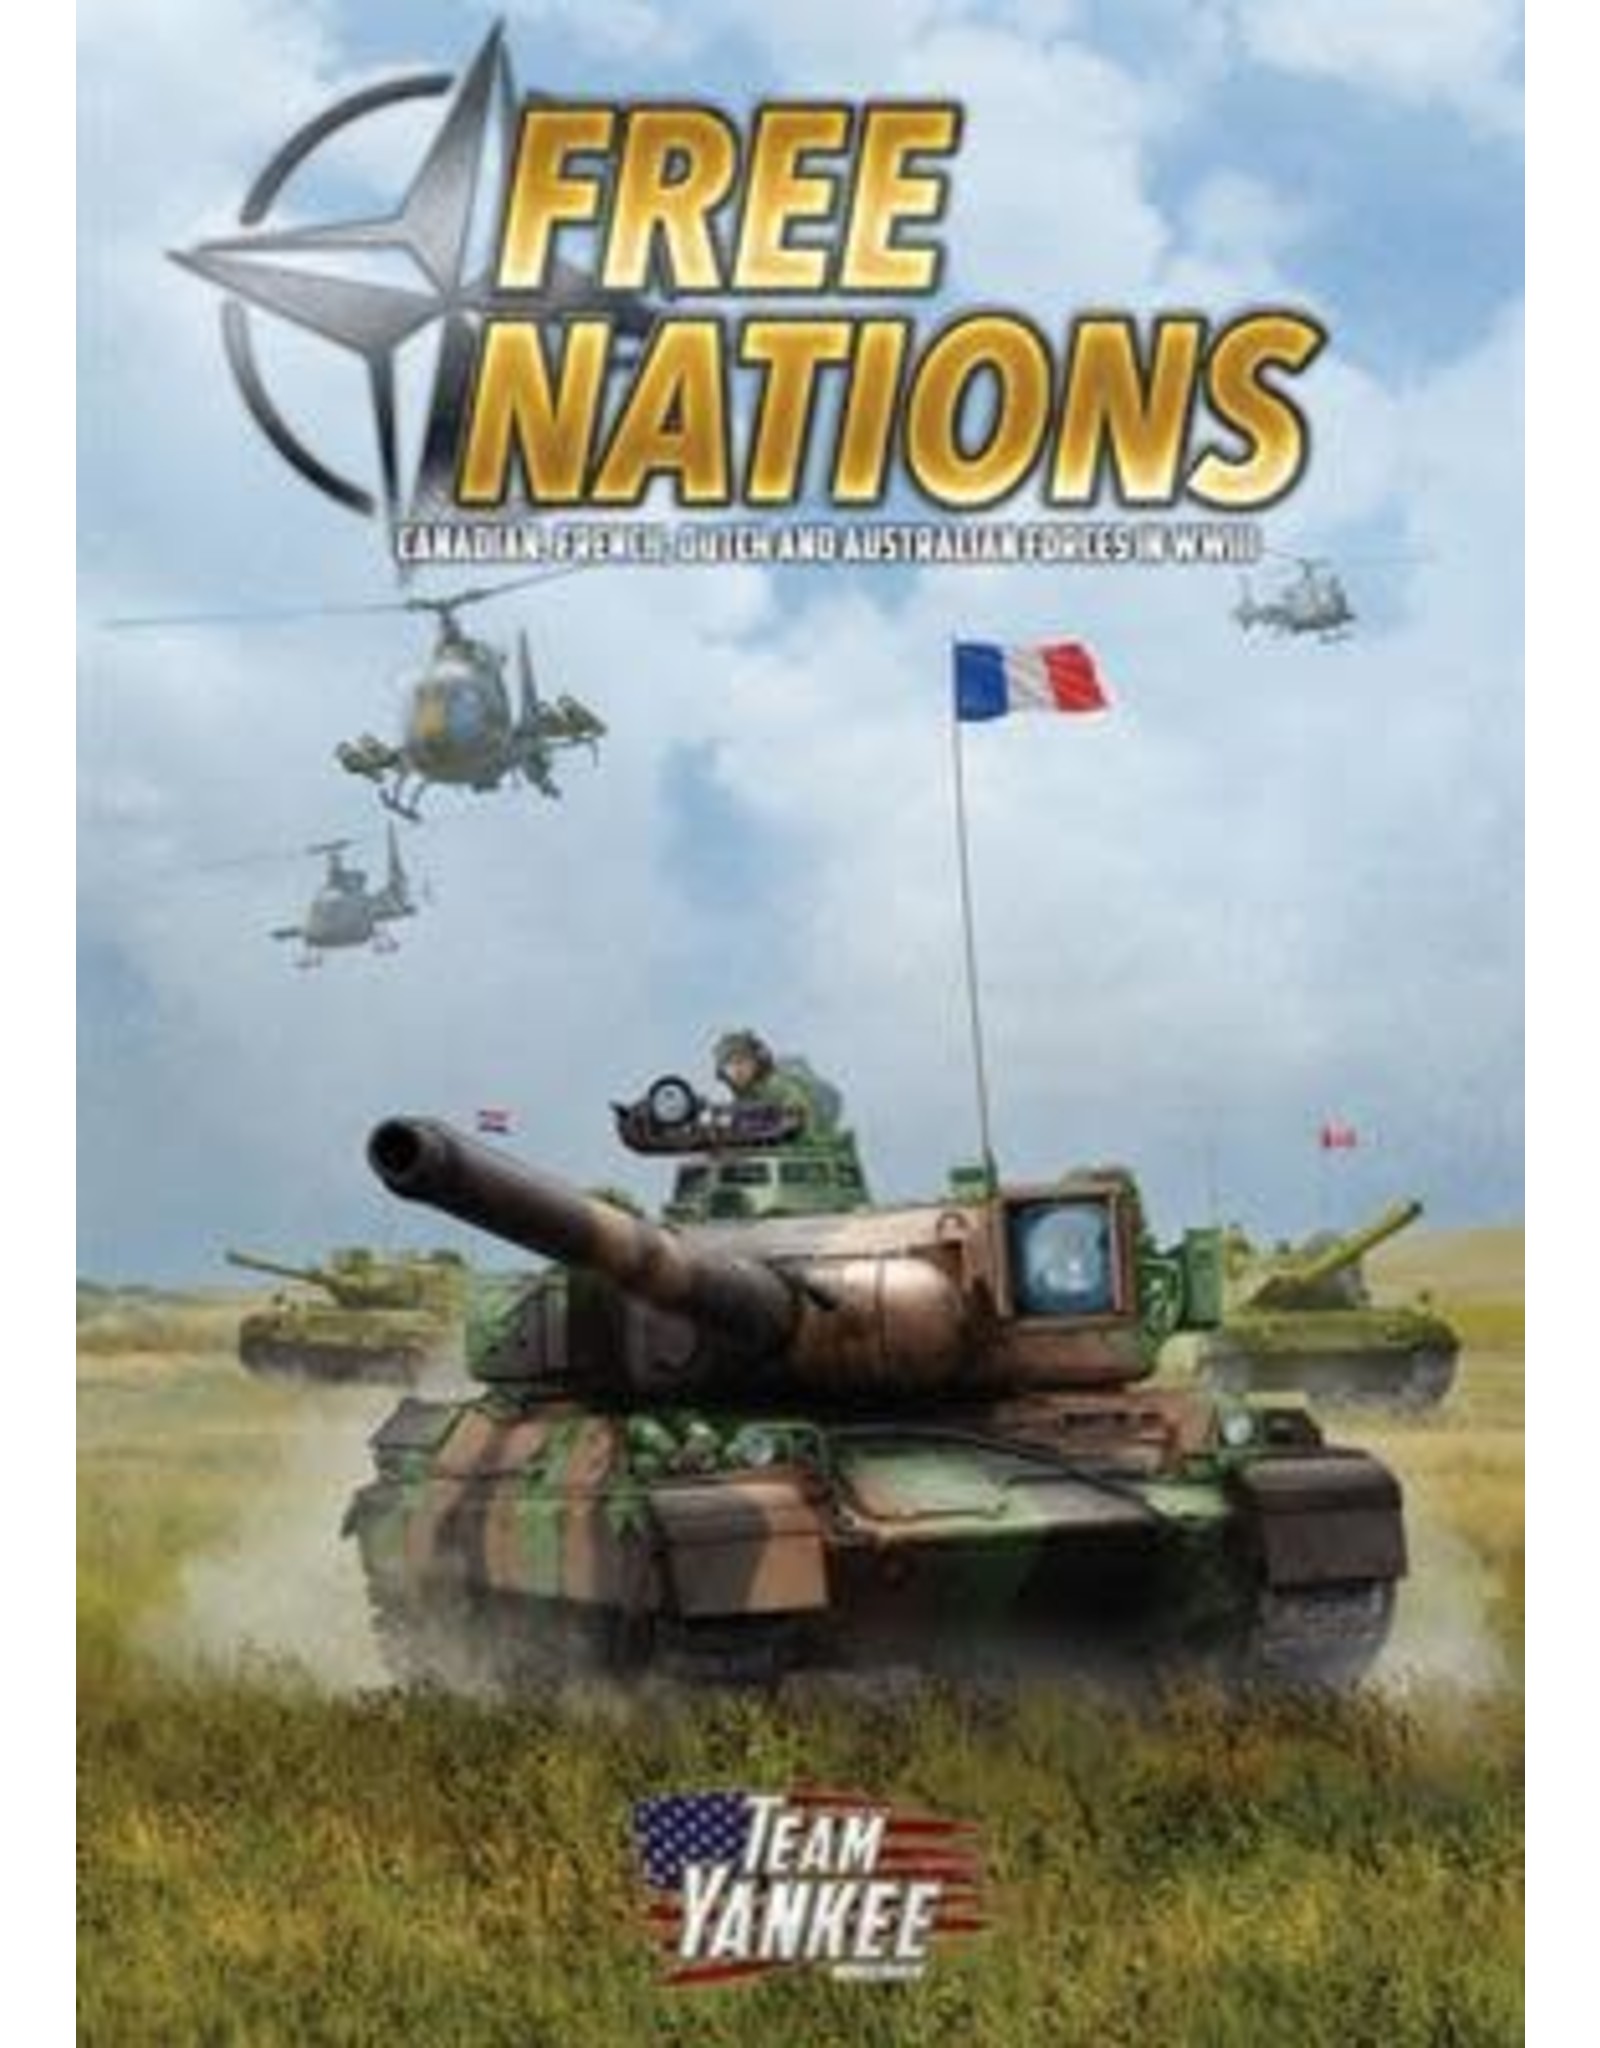 Battlefront Miniatures Team Yankee: Free Nations Book